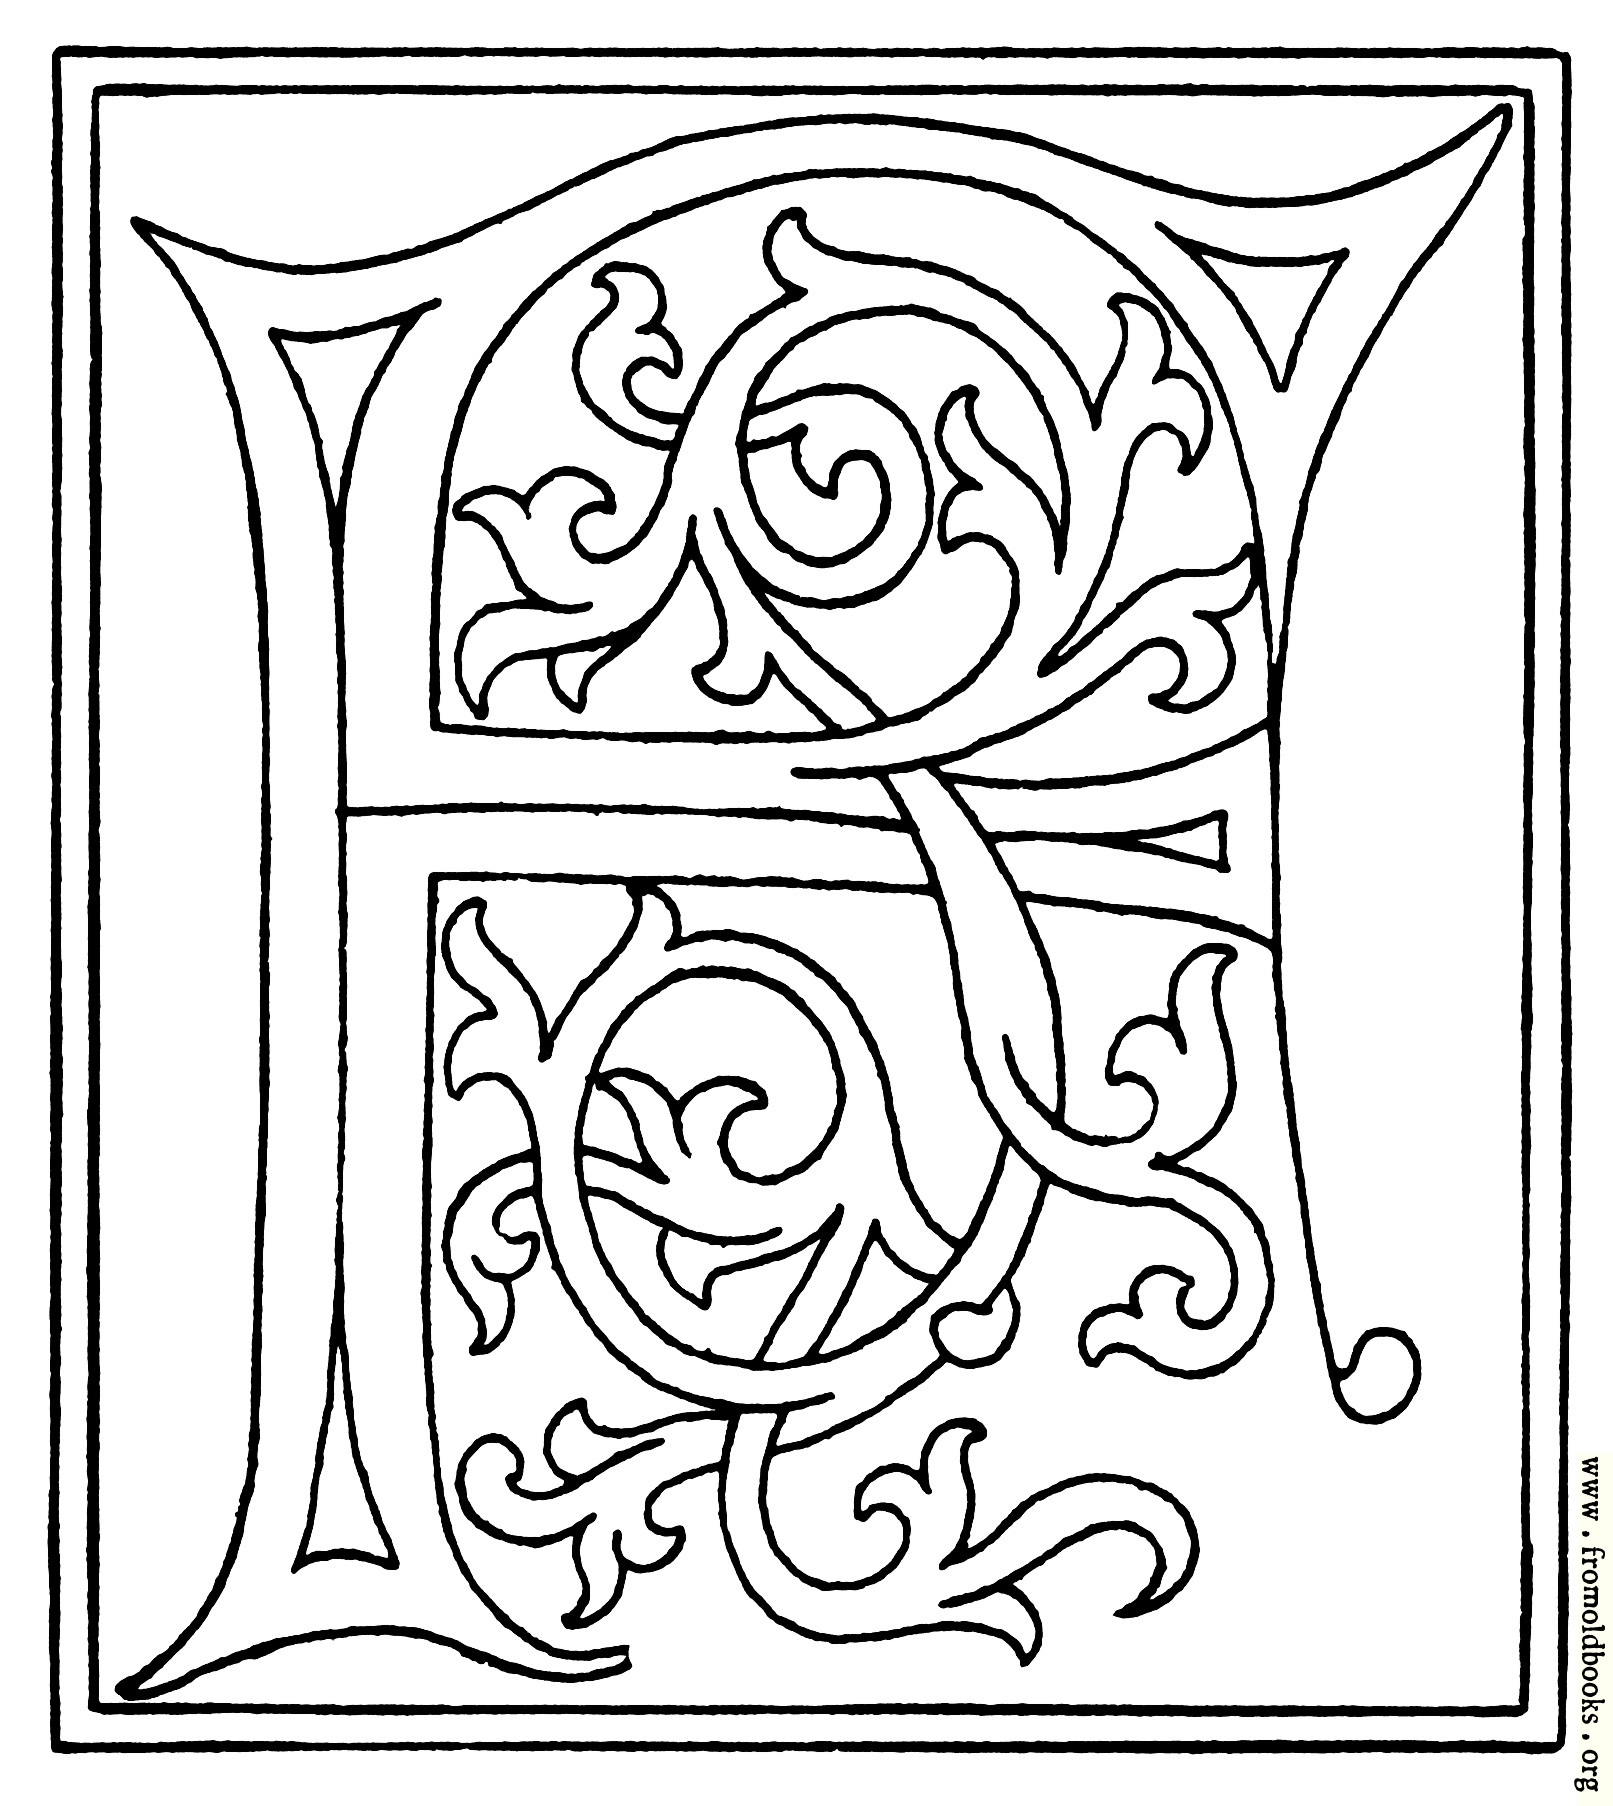 [Picture: clipart: initial letter F from late 15th century printed book]